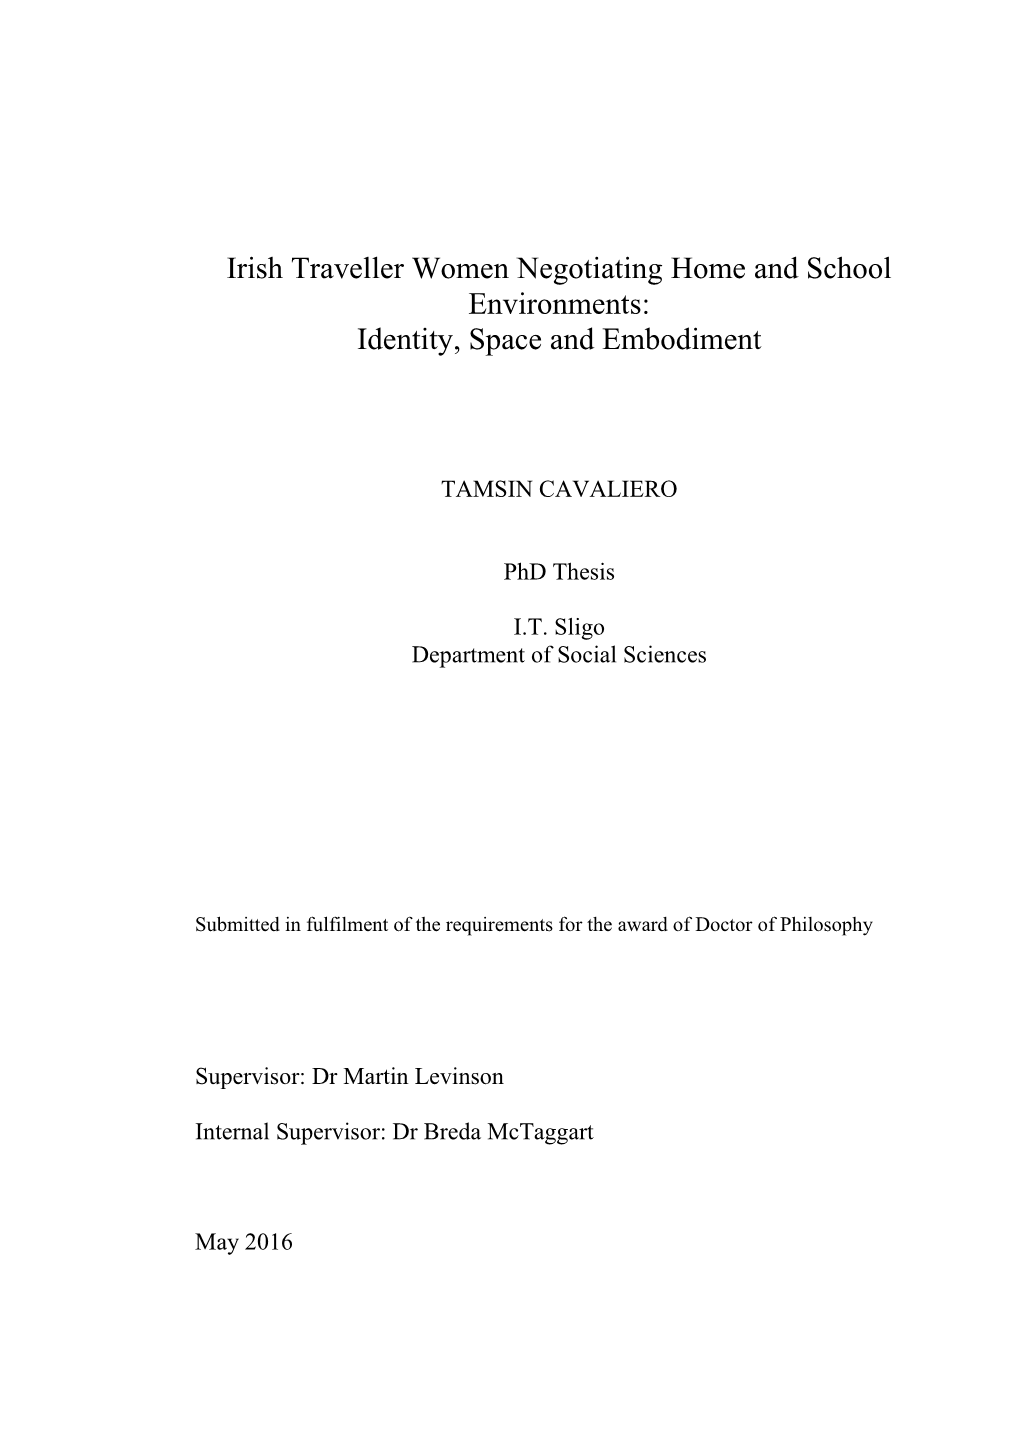 Irish Traveller Women Negotiating Home and School Environments: Identity, Space and Embodiment